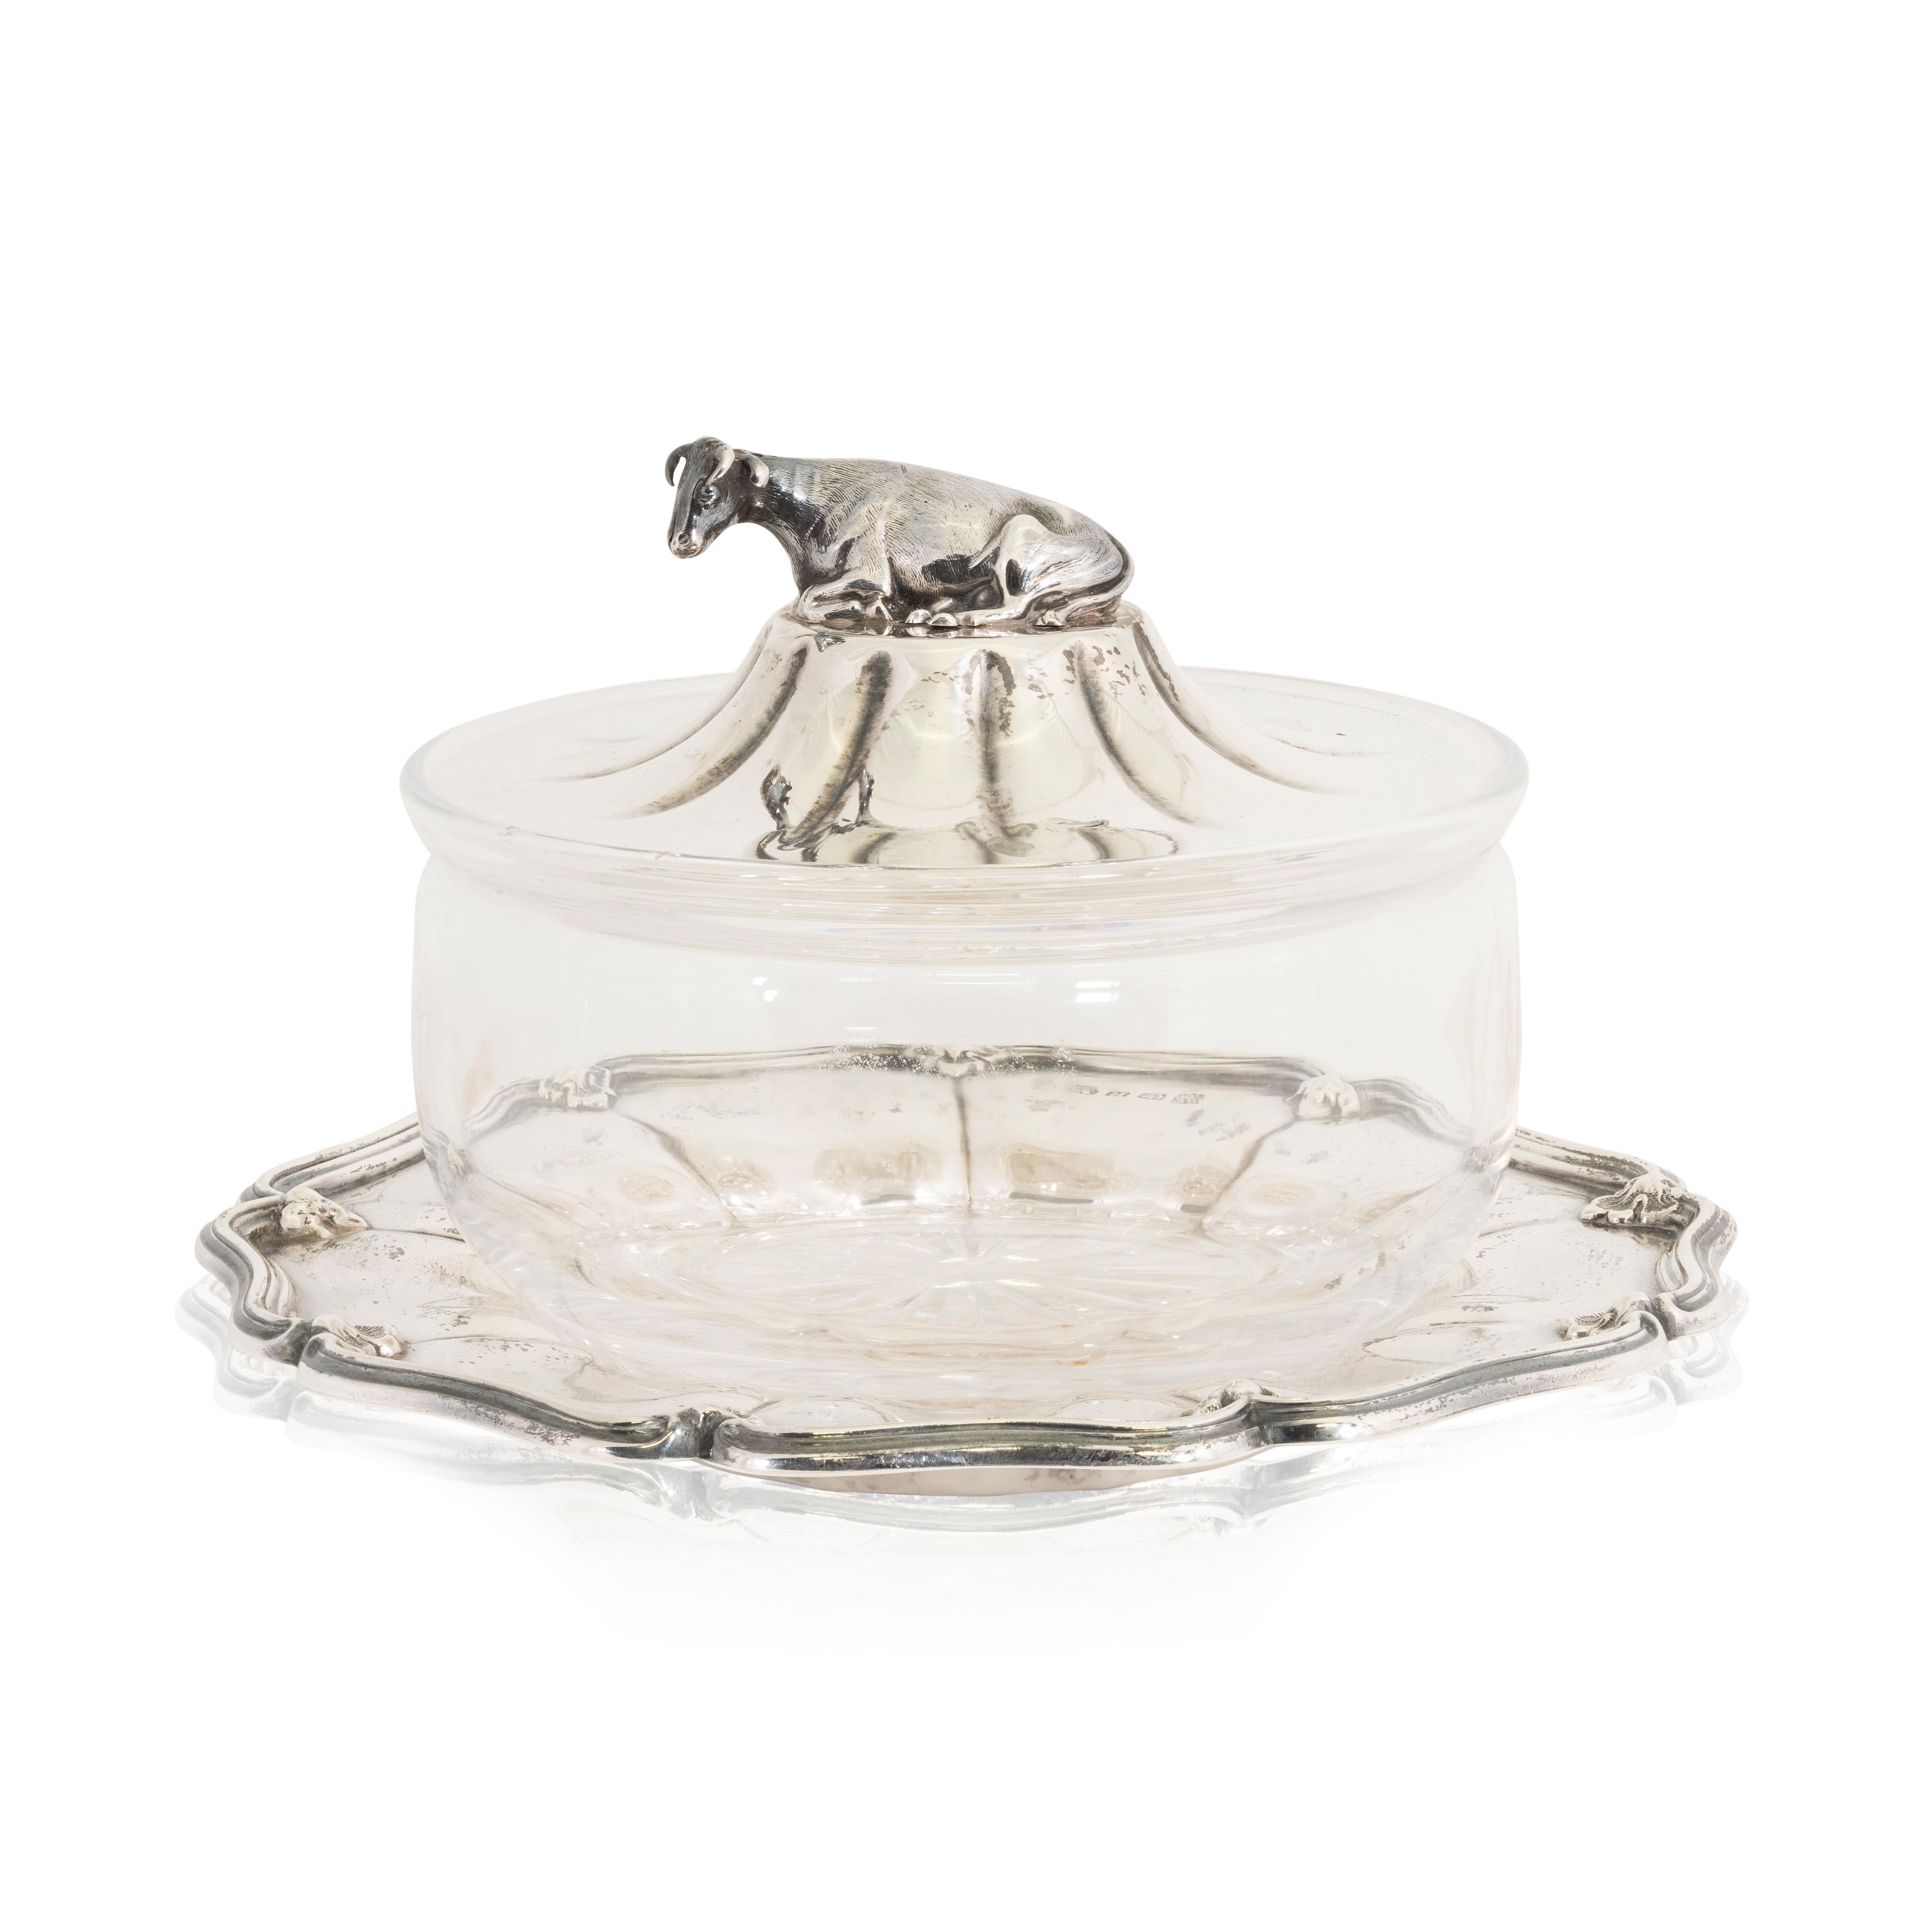 Victorian sterling silver and glass butter dish hallmarked Sheffield 1859 - 1860 by Henry Wilkinson & Co. Glass dish with a serpentine - sterling silver under plate with a molded rim cavetto-dome lid with recumbent cow finial. Sterling elements